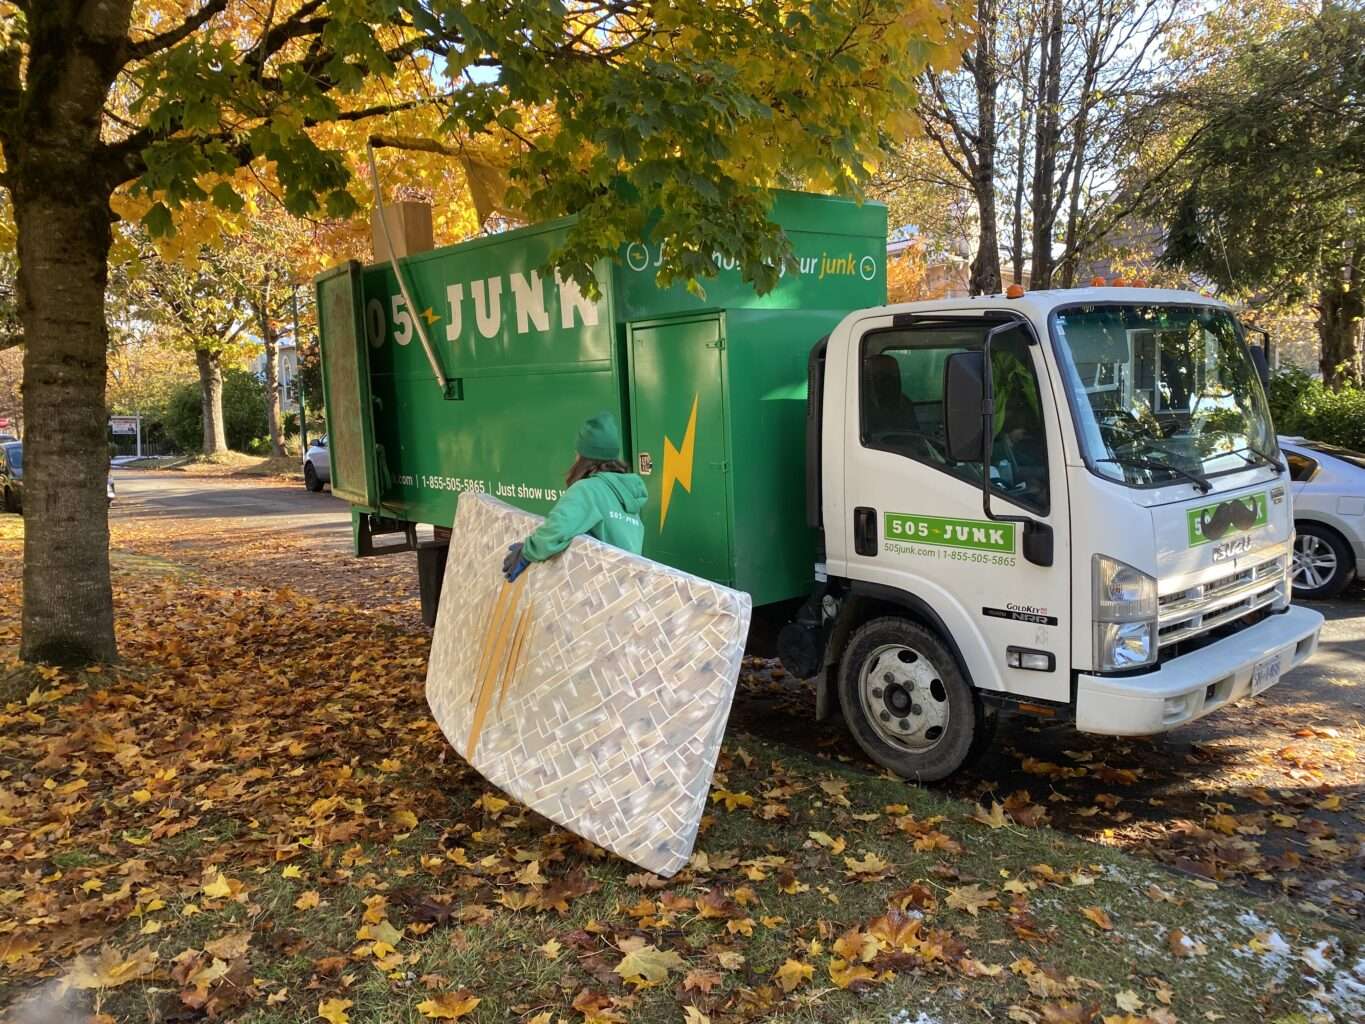 A 505-Junk truck in the fall leaves with an employee carrying a mattress to the truck.